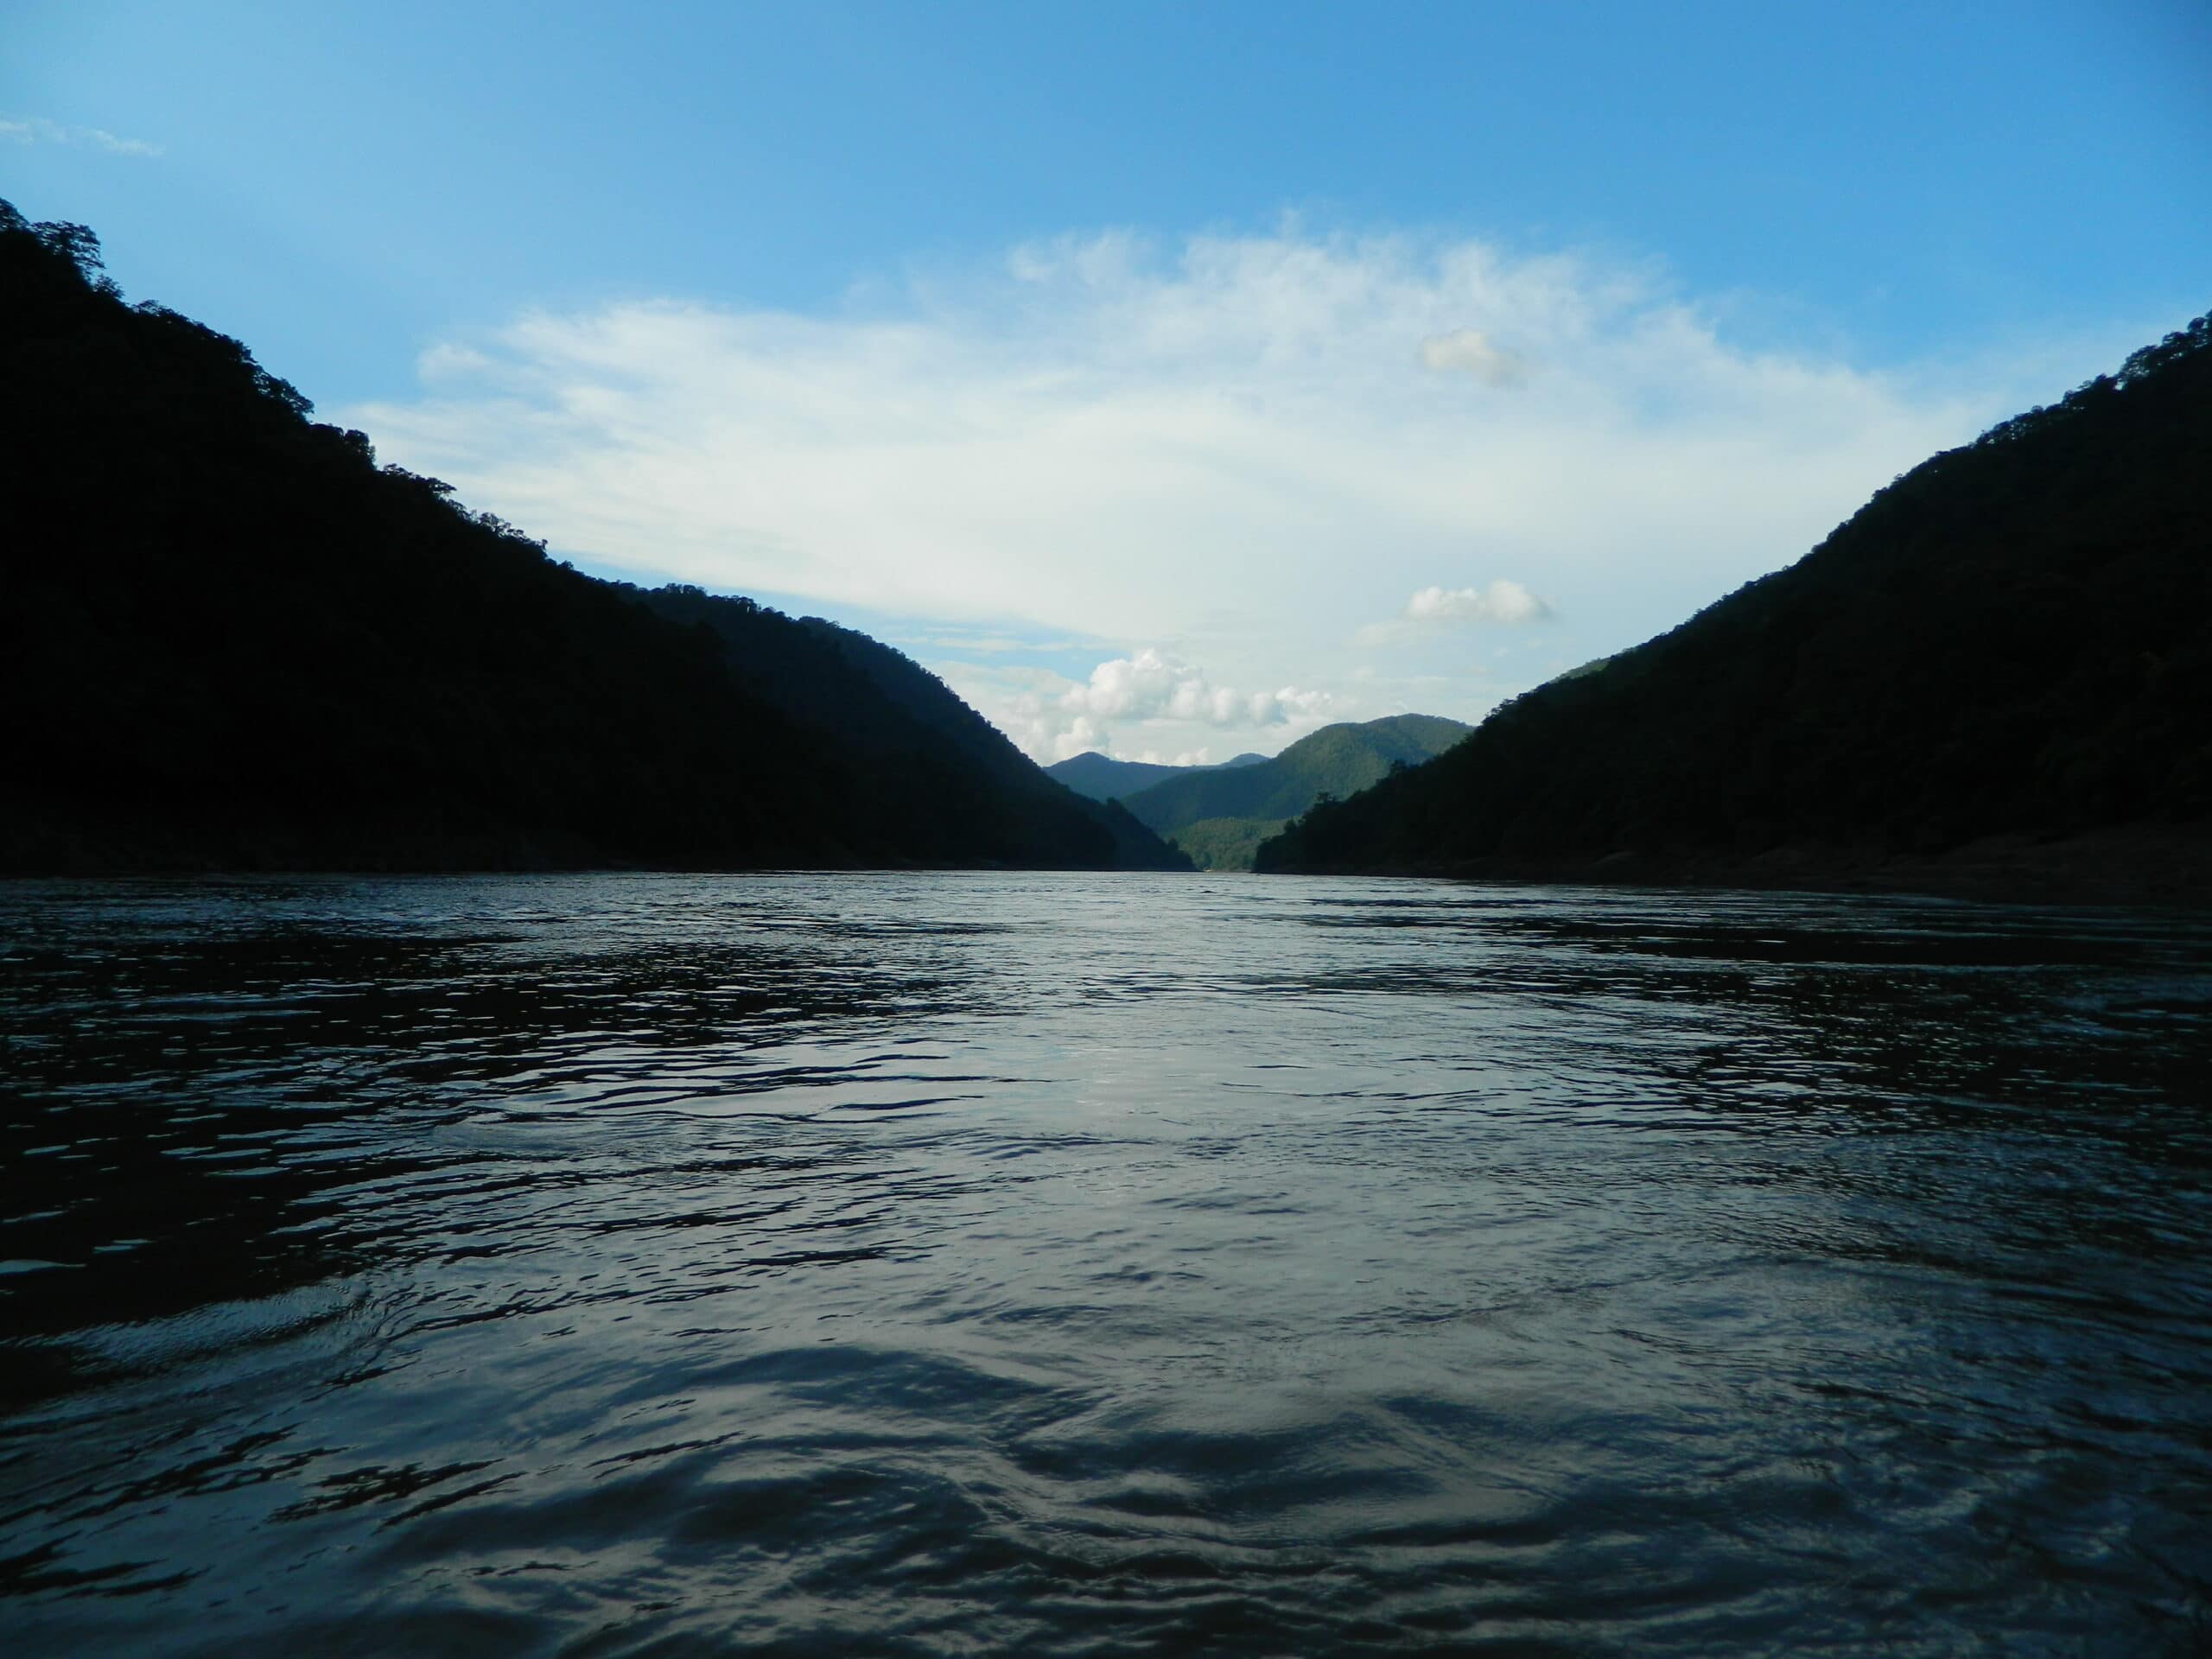 Dusk on the mighty Salween River